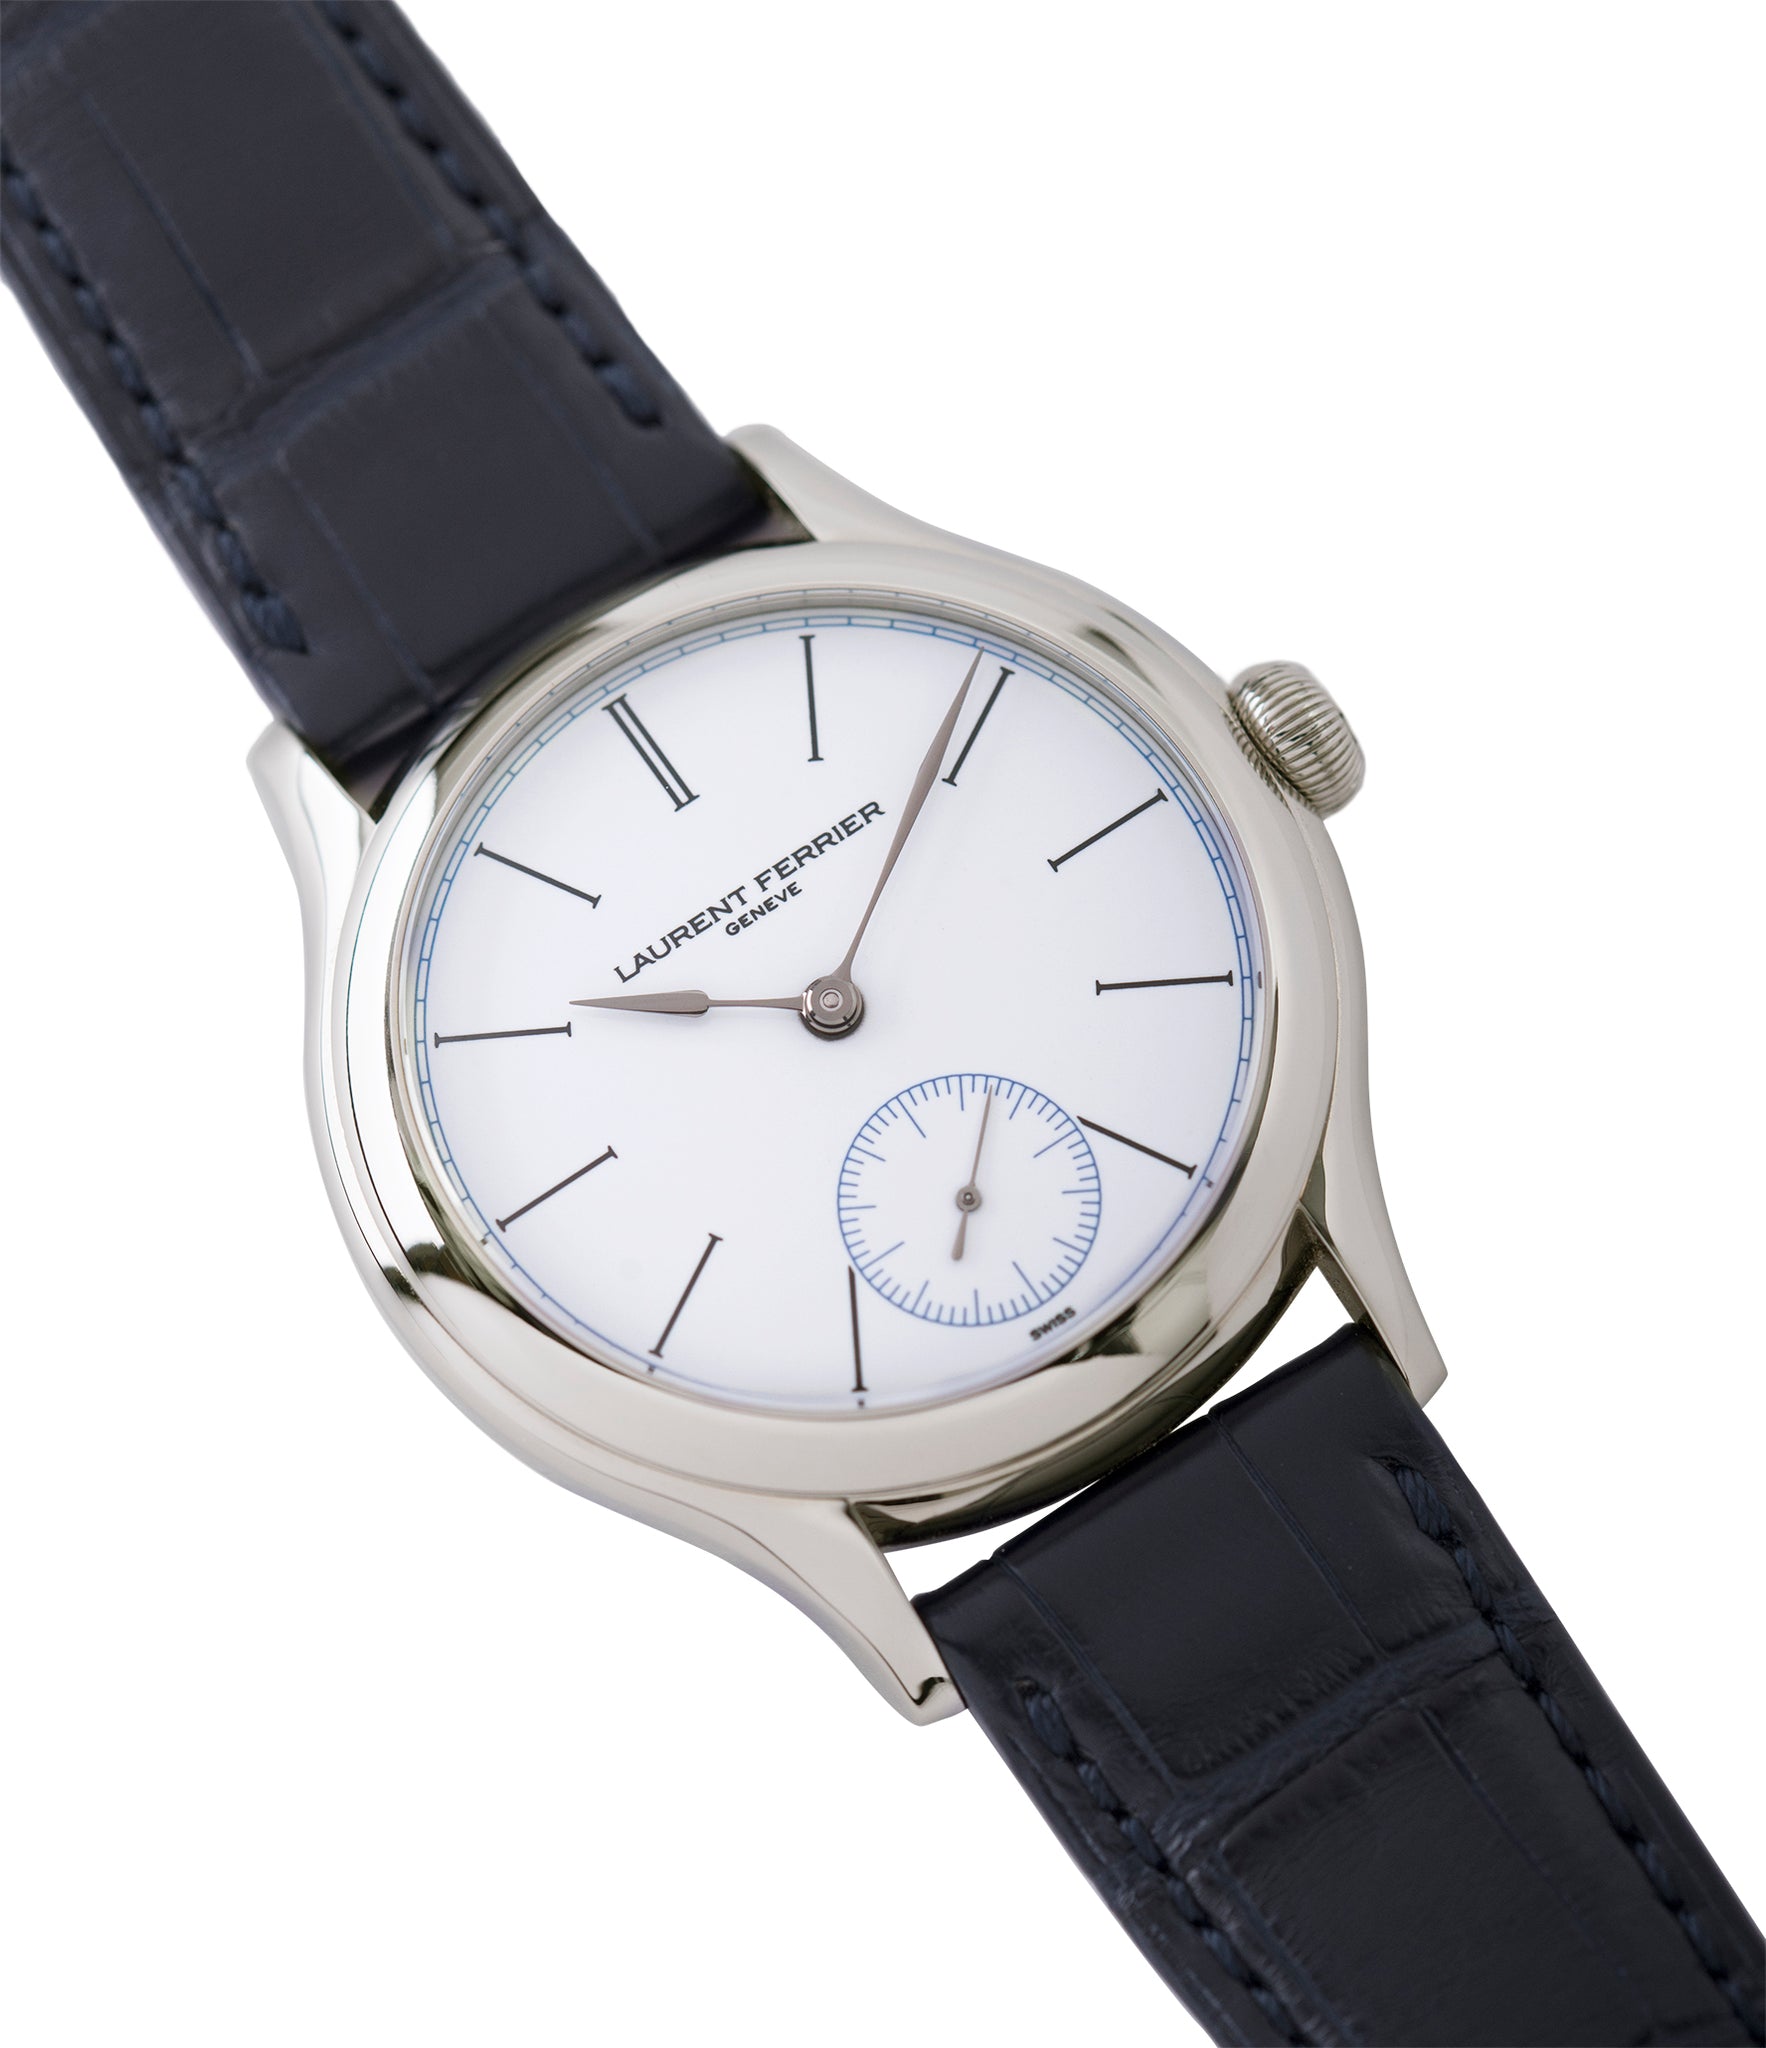 shop Laurent Ferrier Galet Micro-Rotor FBN 230.02 Enamel dial steel watch for sale online at A Collected Man London UK approved seller of independent watchmaker Laurent Ferrier